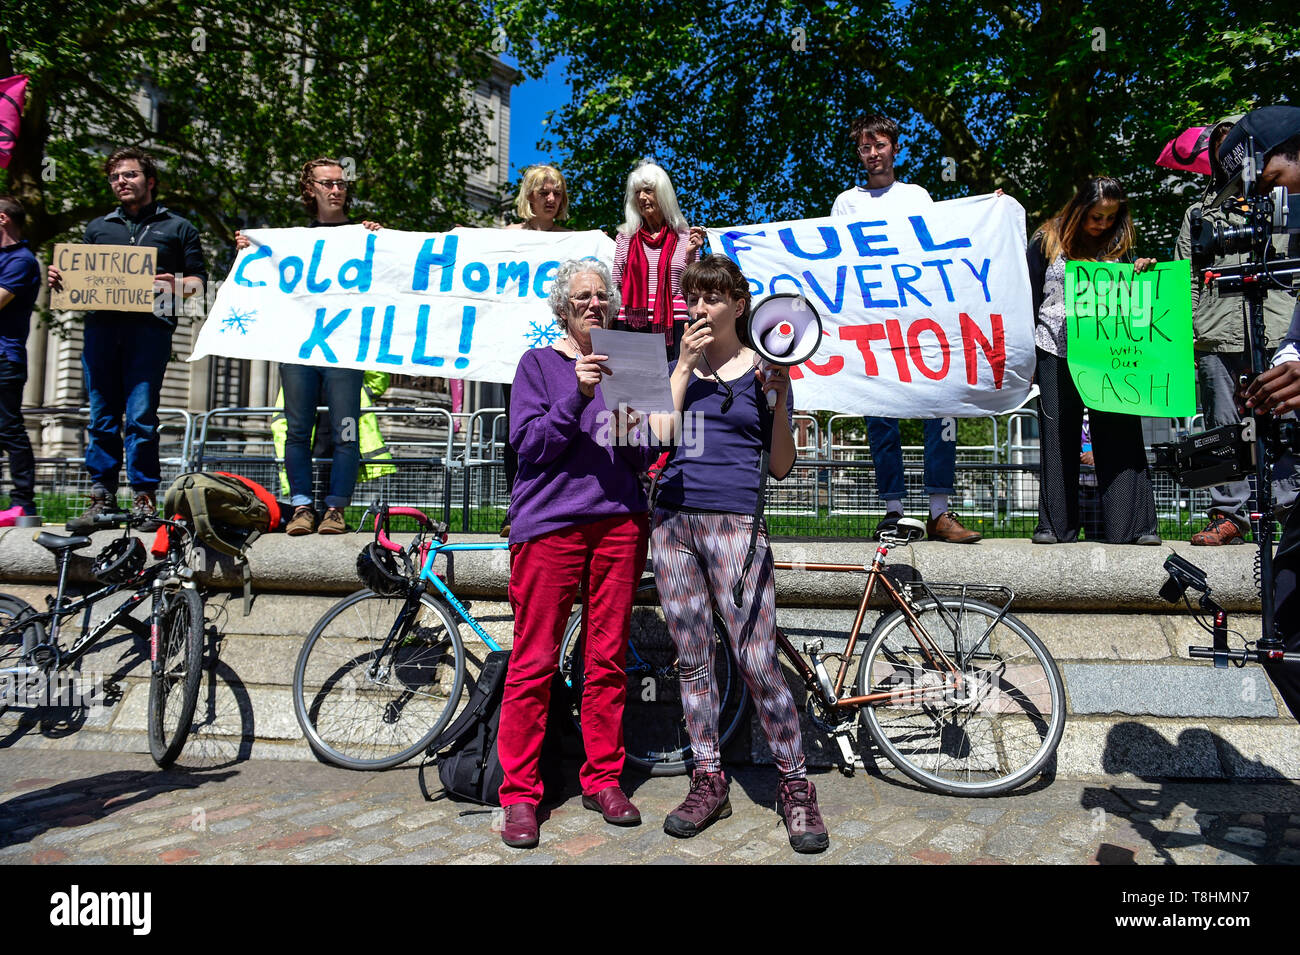 London, UK. 13th  May, 2019. Extinction Rebellion climate protests Gather outside The Queen Elizabeth II Centre. Centrica is hosting their Annual General Meeting. Centrica are a multinational company that are most known to UK residents for their subsidiary British Gas. But they also invest a large amount of money into Cuadrilla, the only company with an active fracking operation in the UK. Credit: Quan Van /Alamy Live News Stock Photo